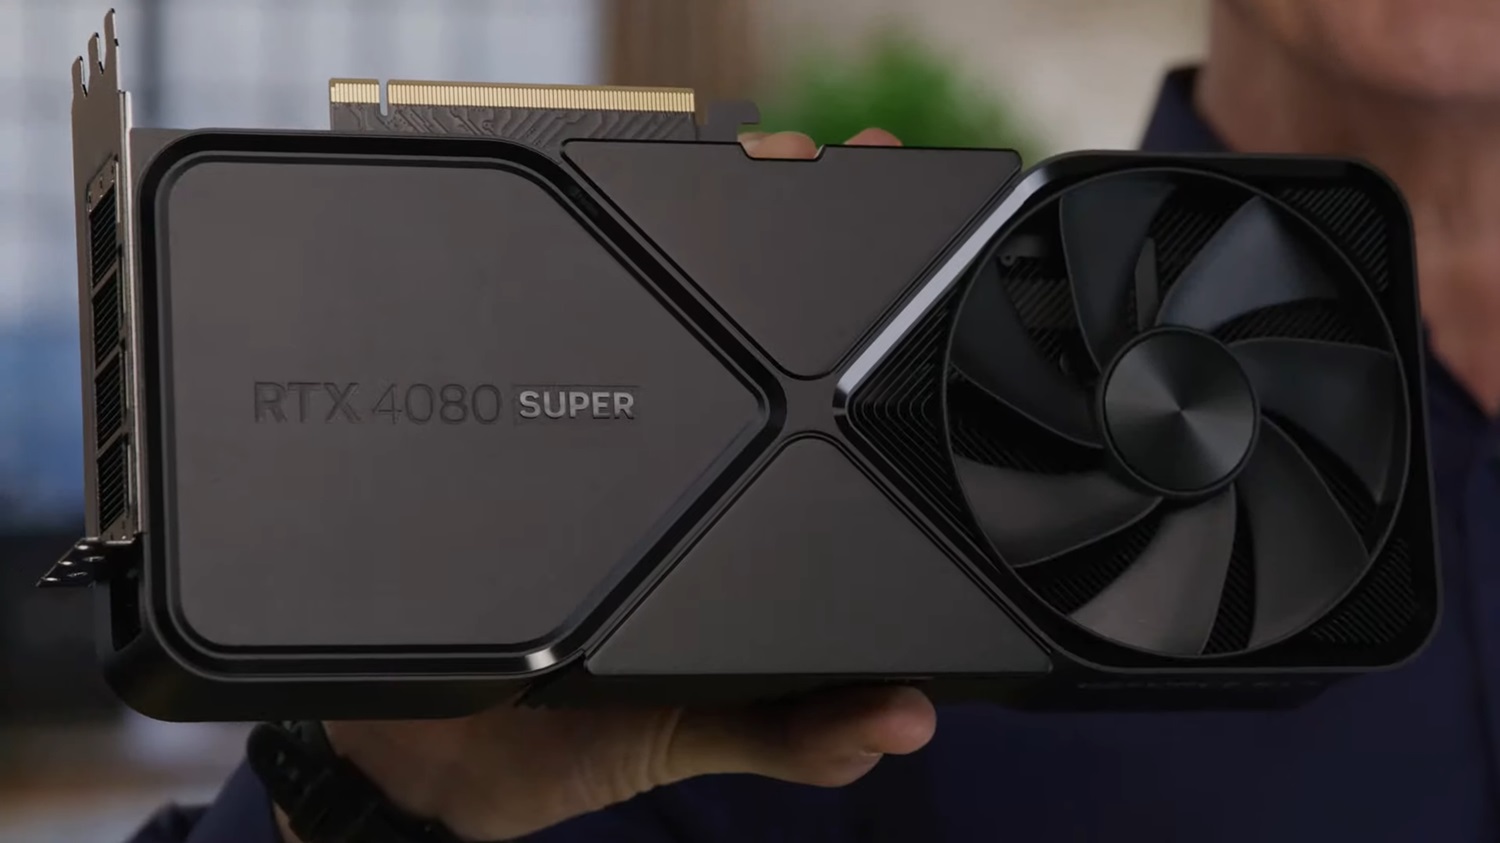 Nvidia GeForce RTX 4080 Super review: The 4K graphics card you